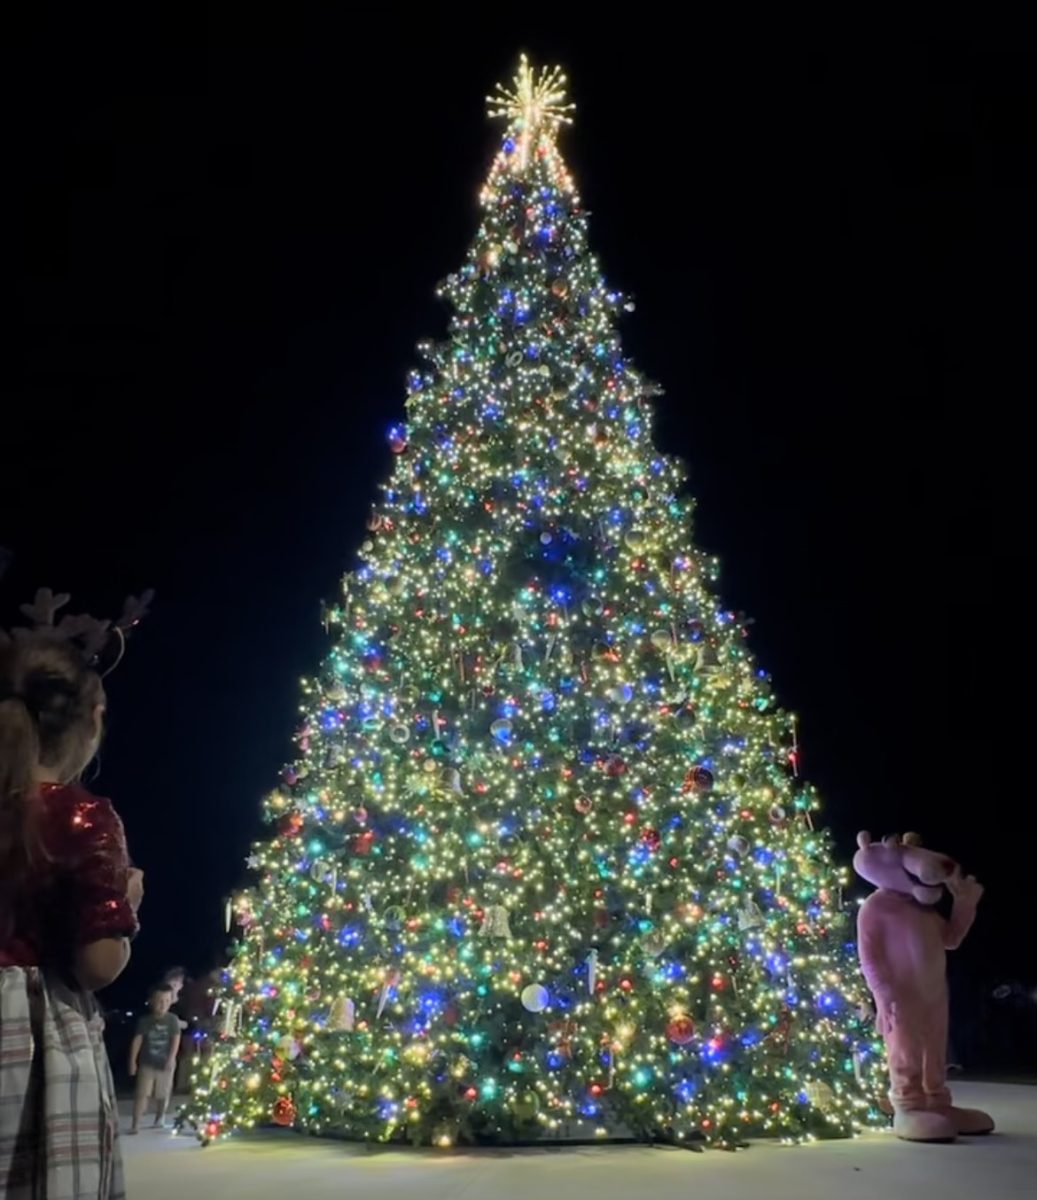 The Christmas tree on Marco Island at Veterans Park glowing in the night.